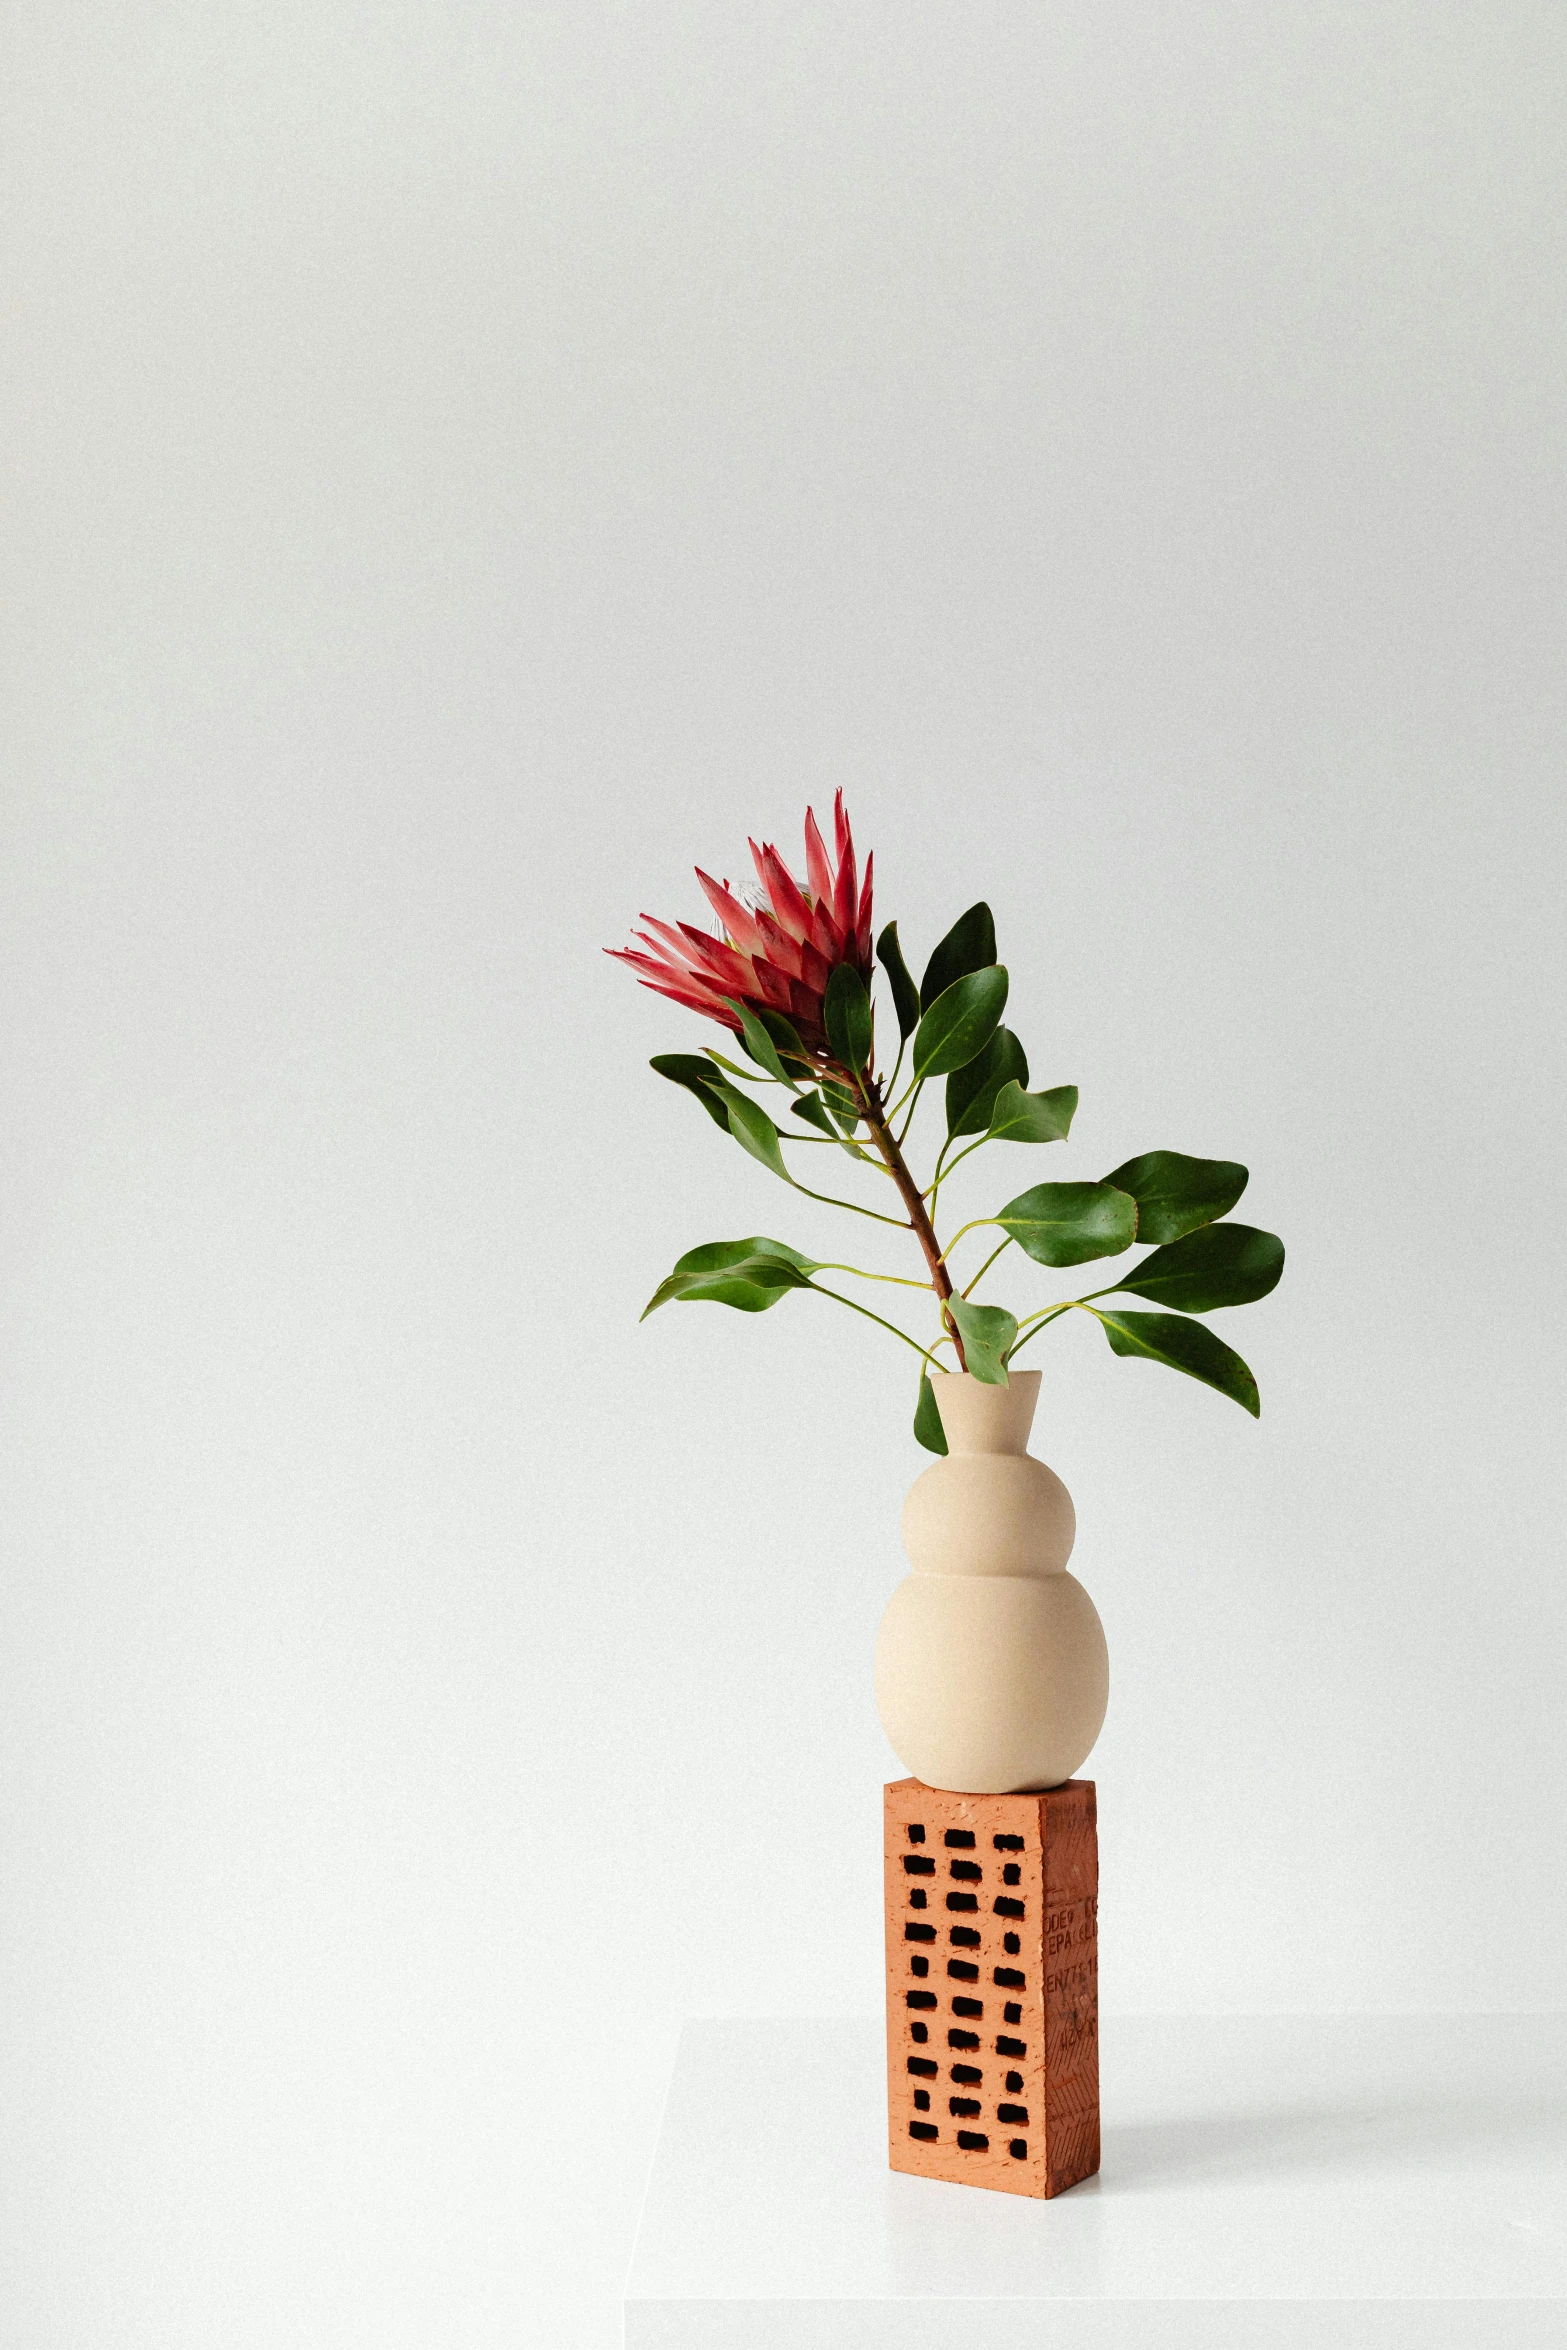 a vase with a flower in it sitting on a table, inspired by Giorgio Morandi, new sculpture, city scape, bromeliads, small crown, studio product shot